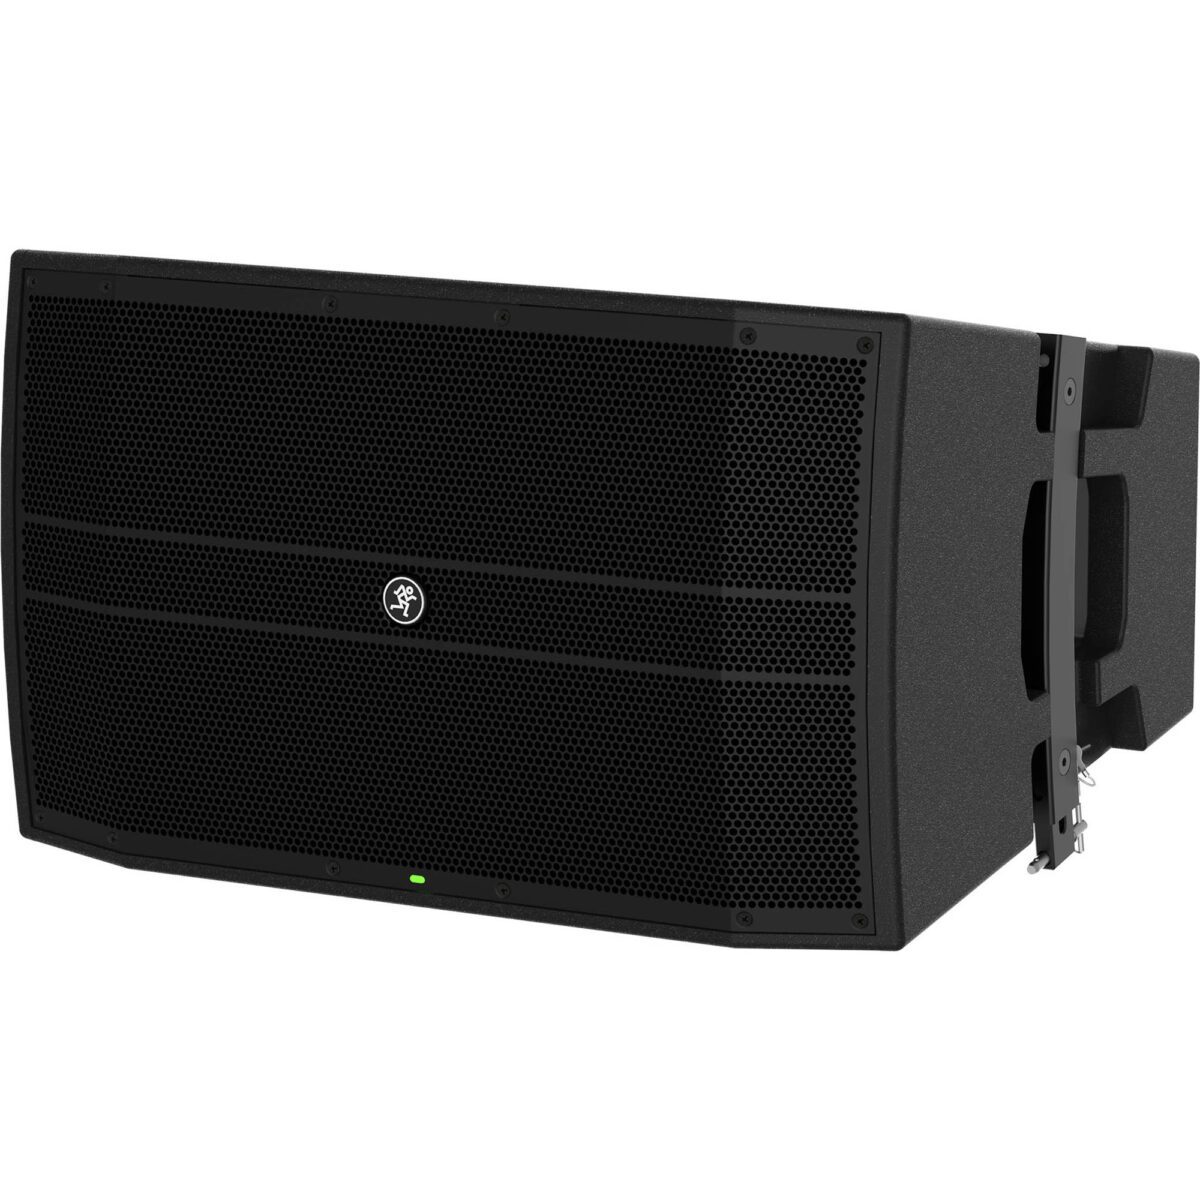 Mackie DRM12A 2000W 12" Active Array Speaker